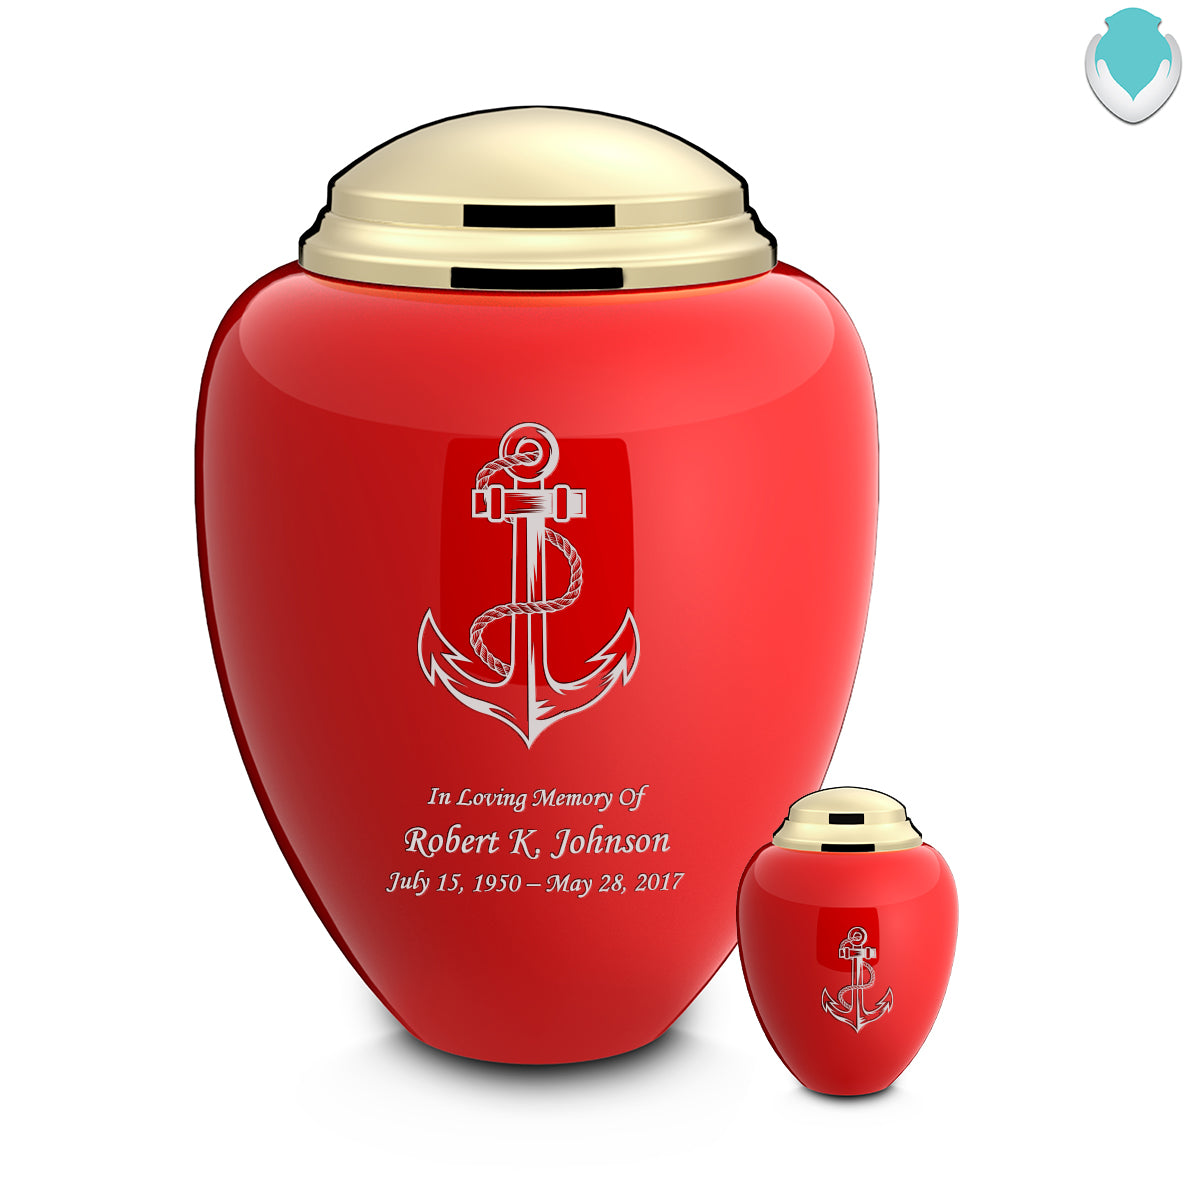 Adult Tribute Red & Shiny Brass Anchor Cremation Urn